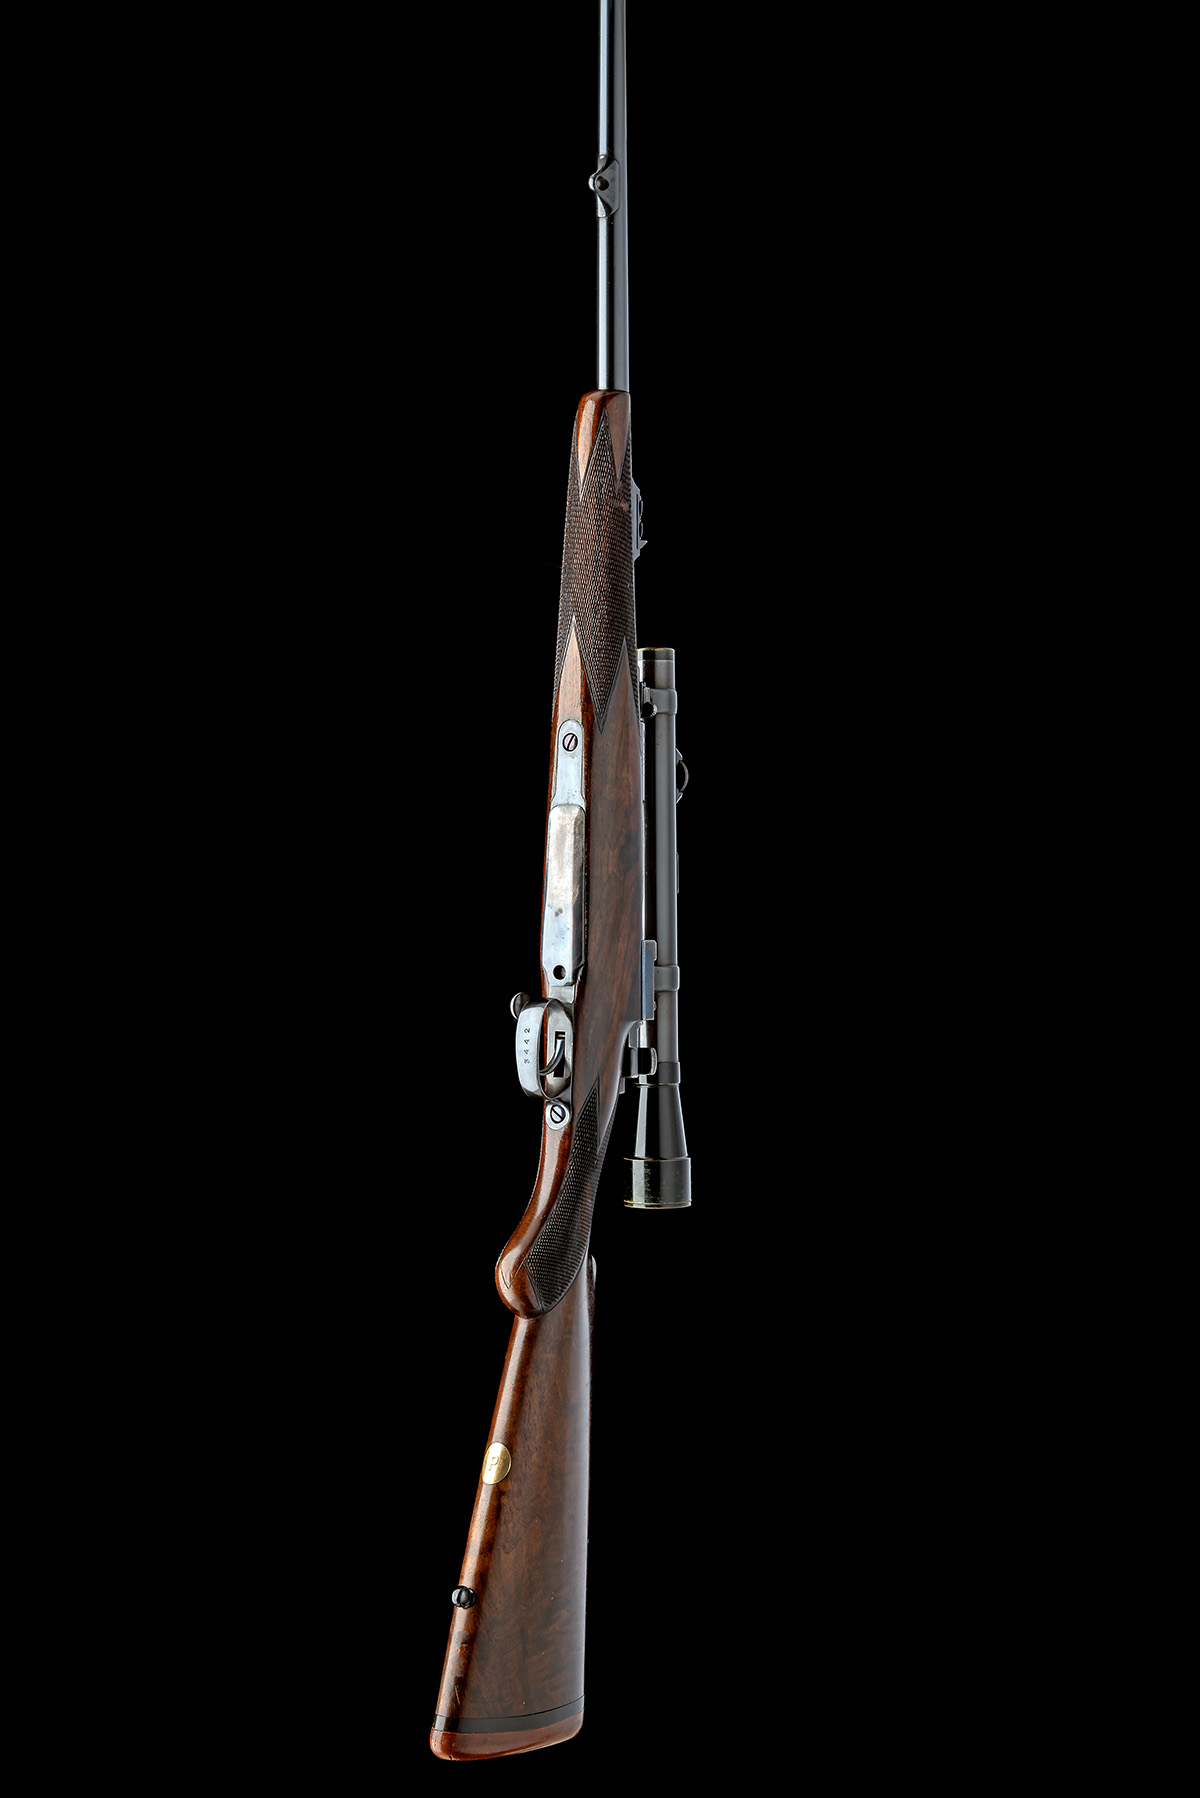 JOHN RIGBY & CO. A .275 (RIGBY) BOLT-MAGAZINE SPORTING RIFLE, serial no. 3442, for 1910, 24in. nitro - Image 8 of 9